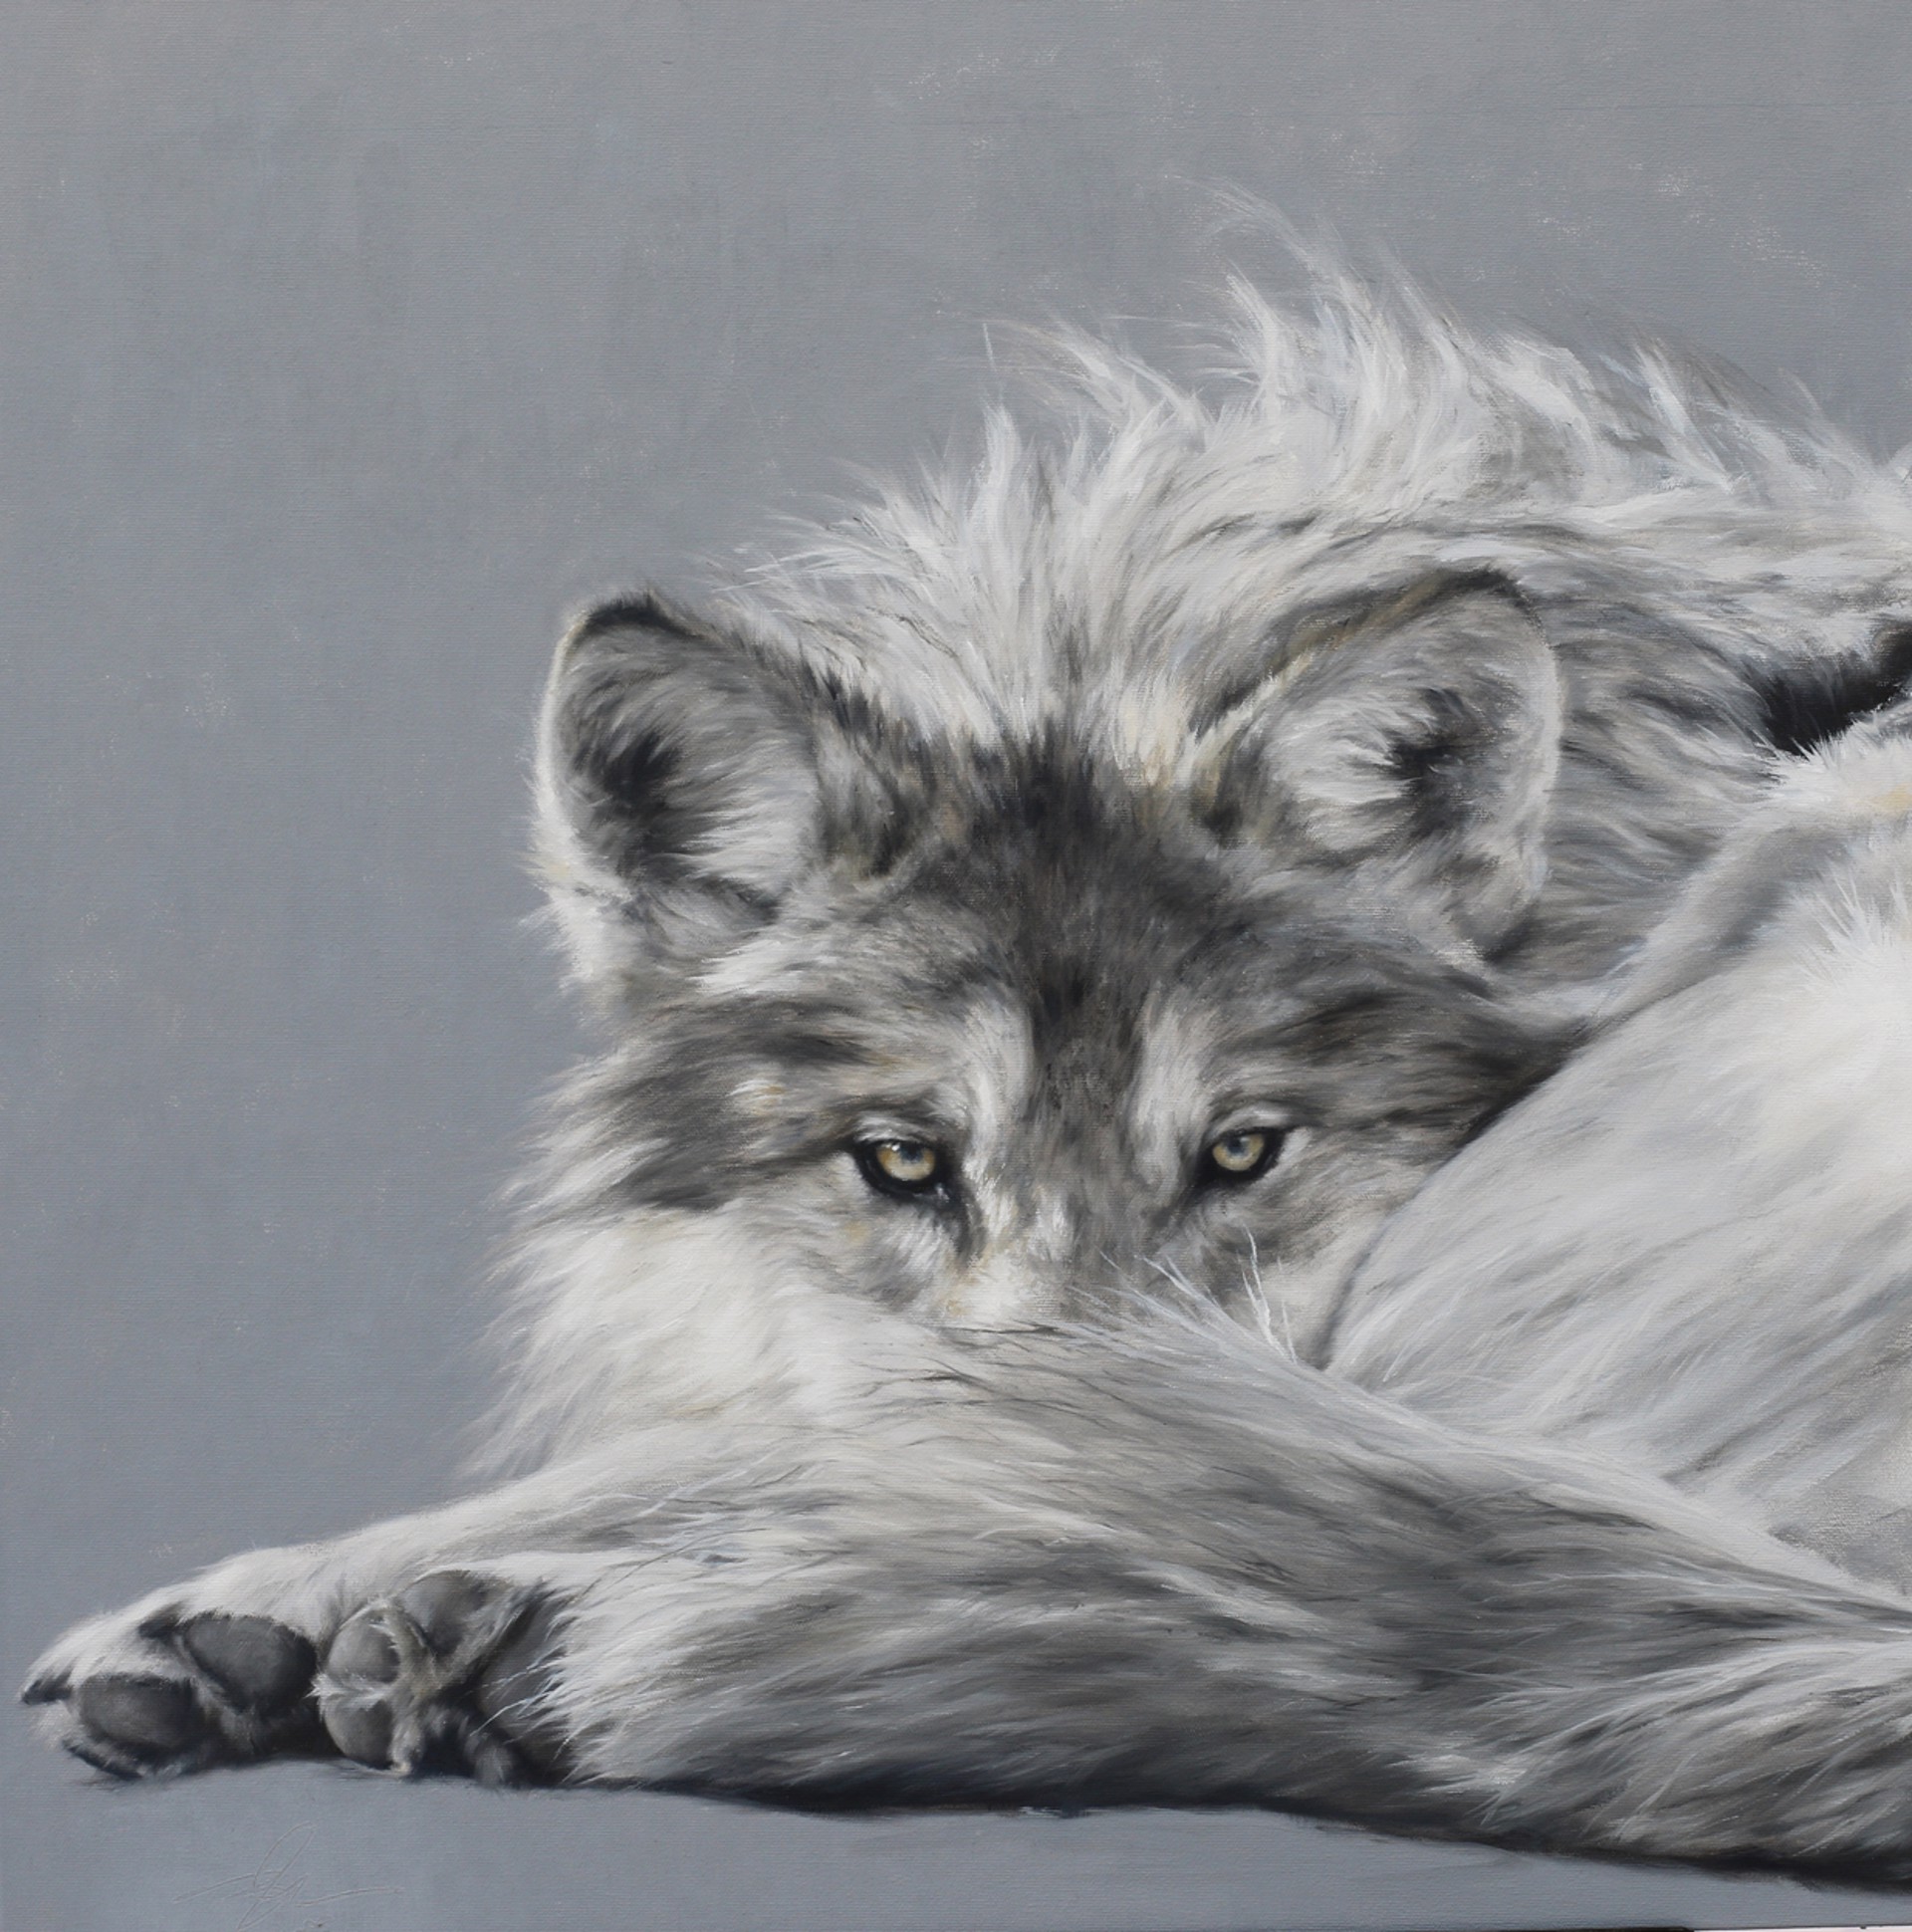 Original Contemporary Oil Painting Of A Grey Wolf Curled Up Looking At The Viewer In Black And White, By Doyle Hostetler